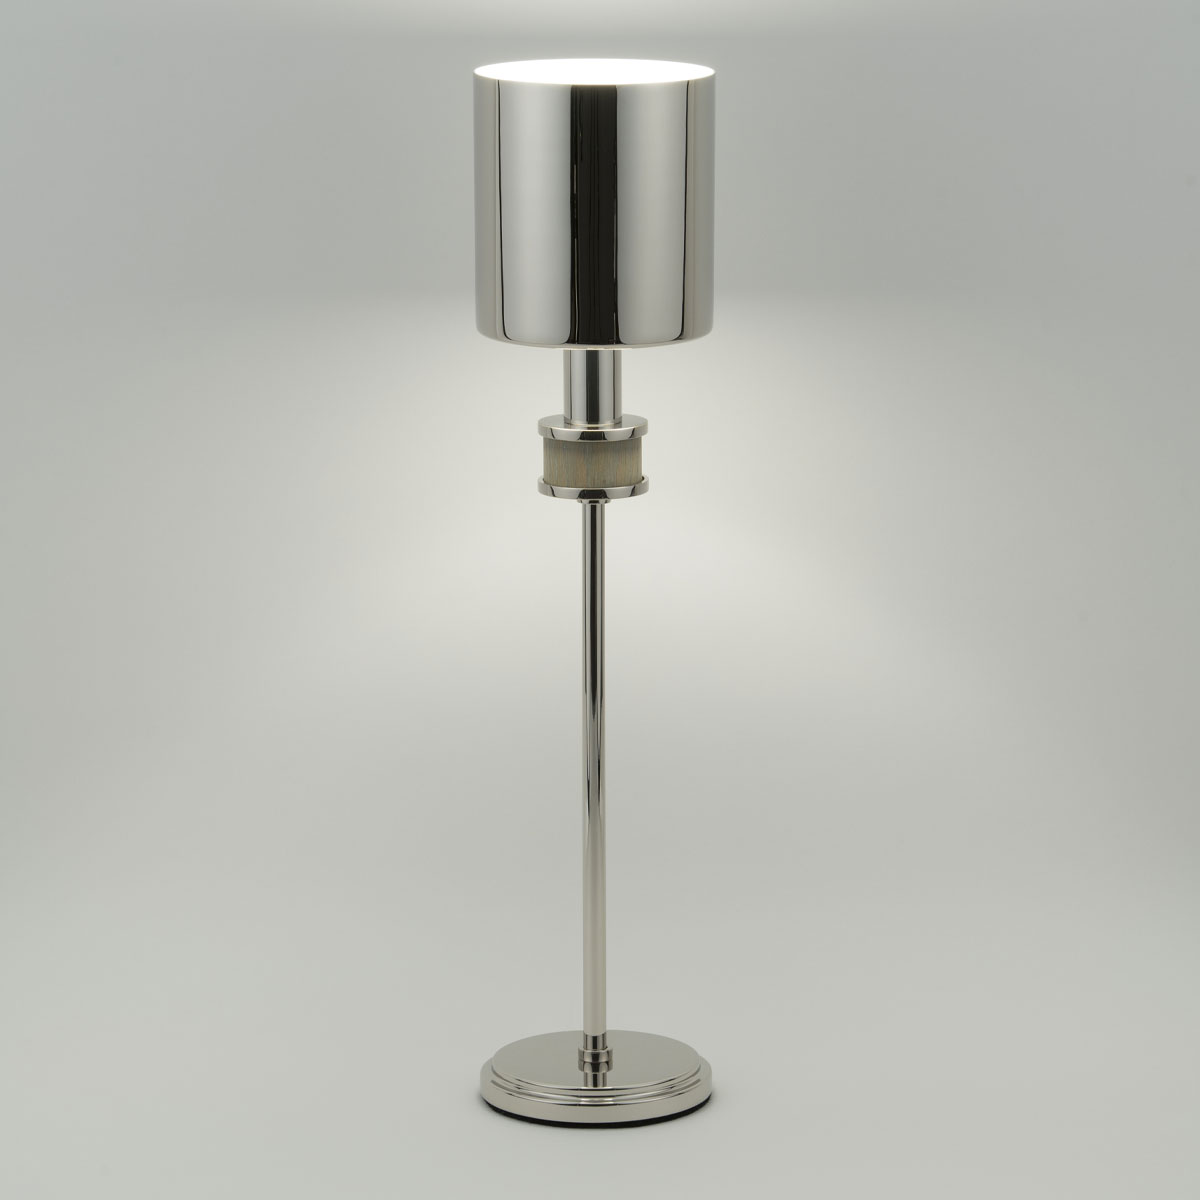 The Topanga Petite table lamp is a jewelry inspired take on a reading or desk lamp.